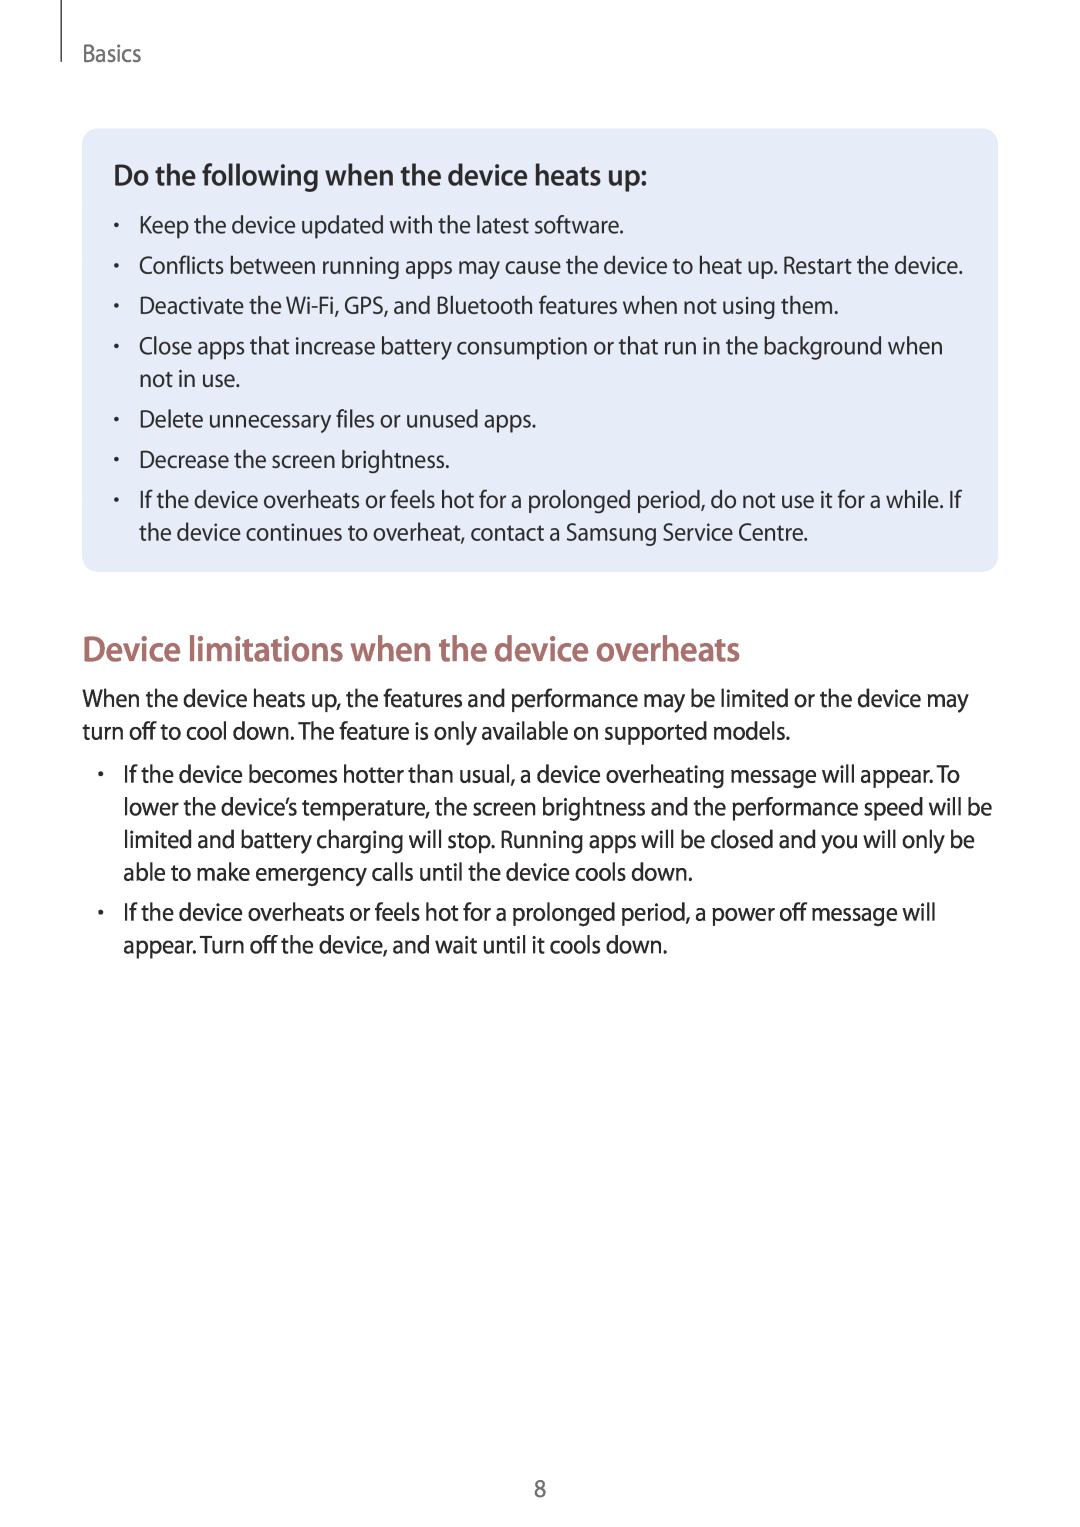 Samsung SM-A530FZKATIM Device limitations when the device overheats, Do the following when the device heats up, Basics 